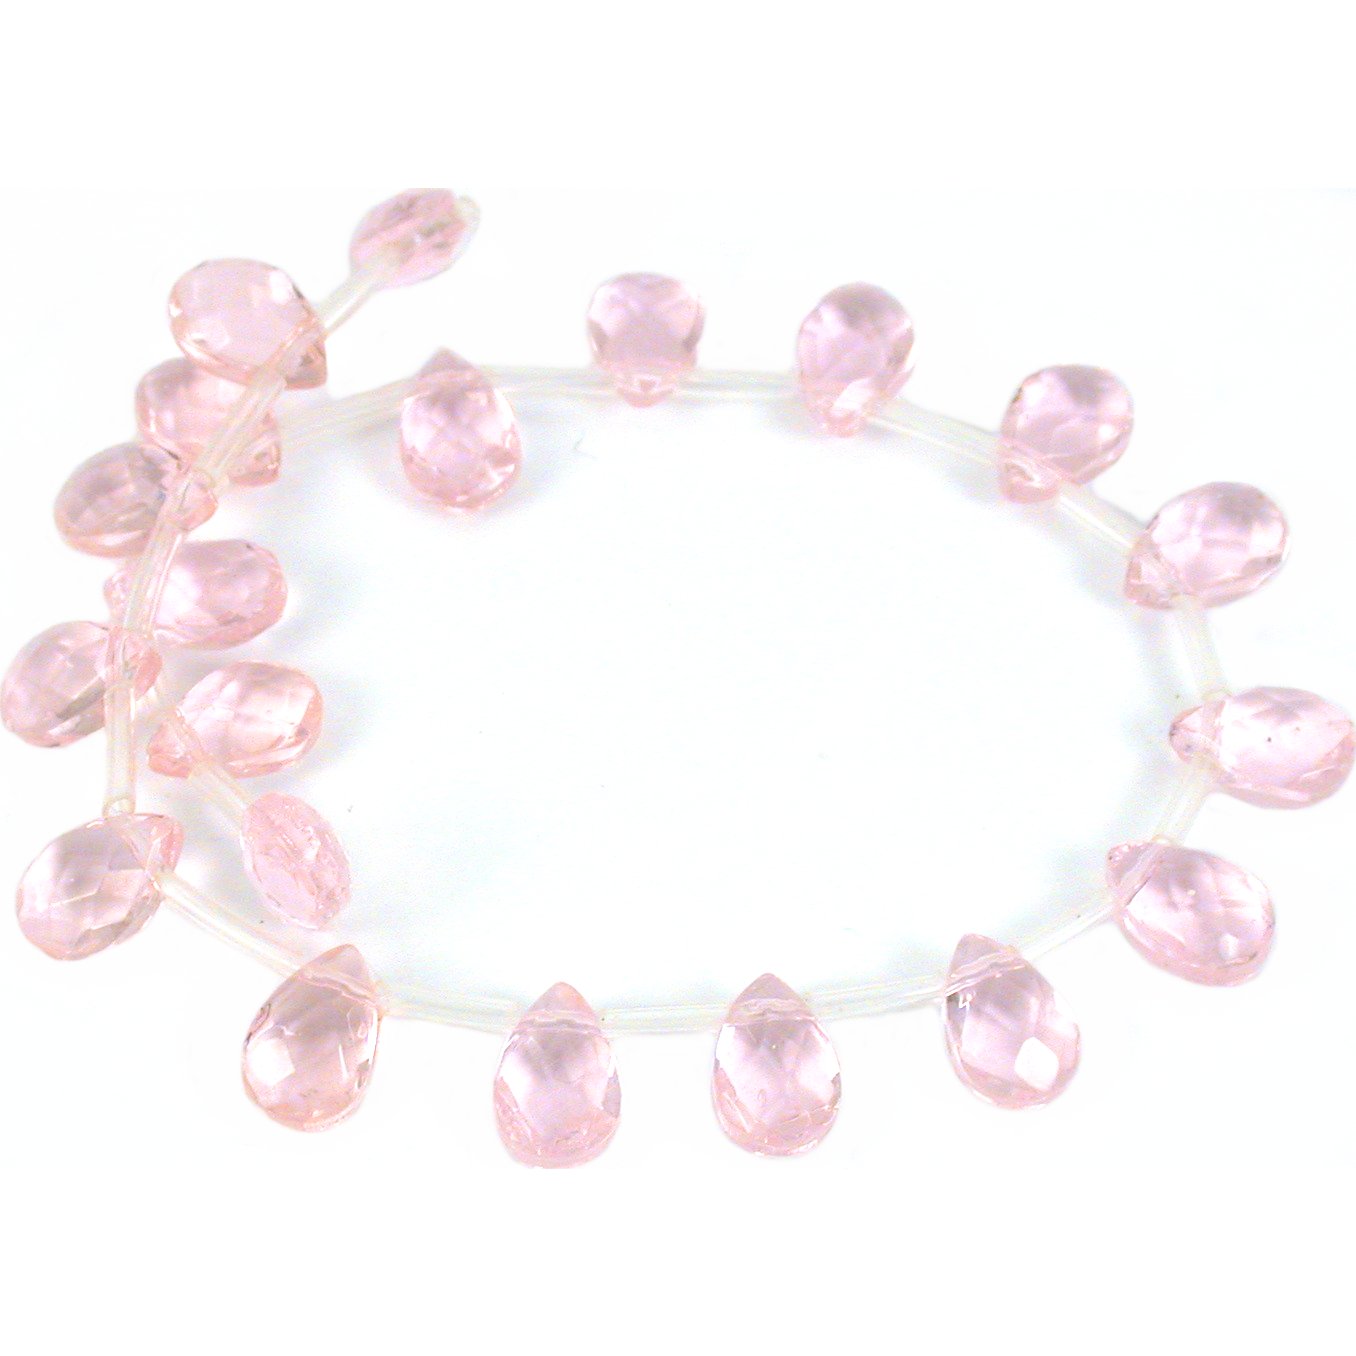 Teardrop Faceted Fire Polished Chinese Crystal Beads Pink 9mm 1 Strand